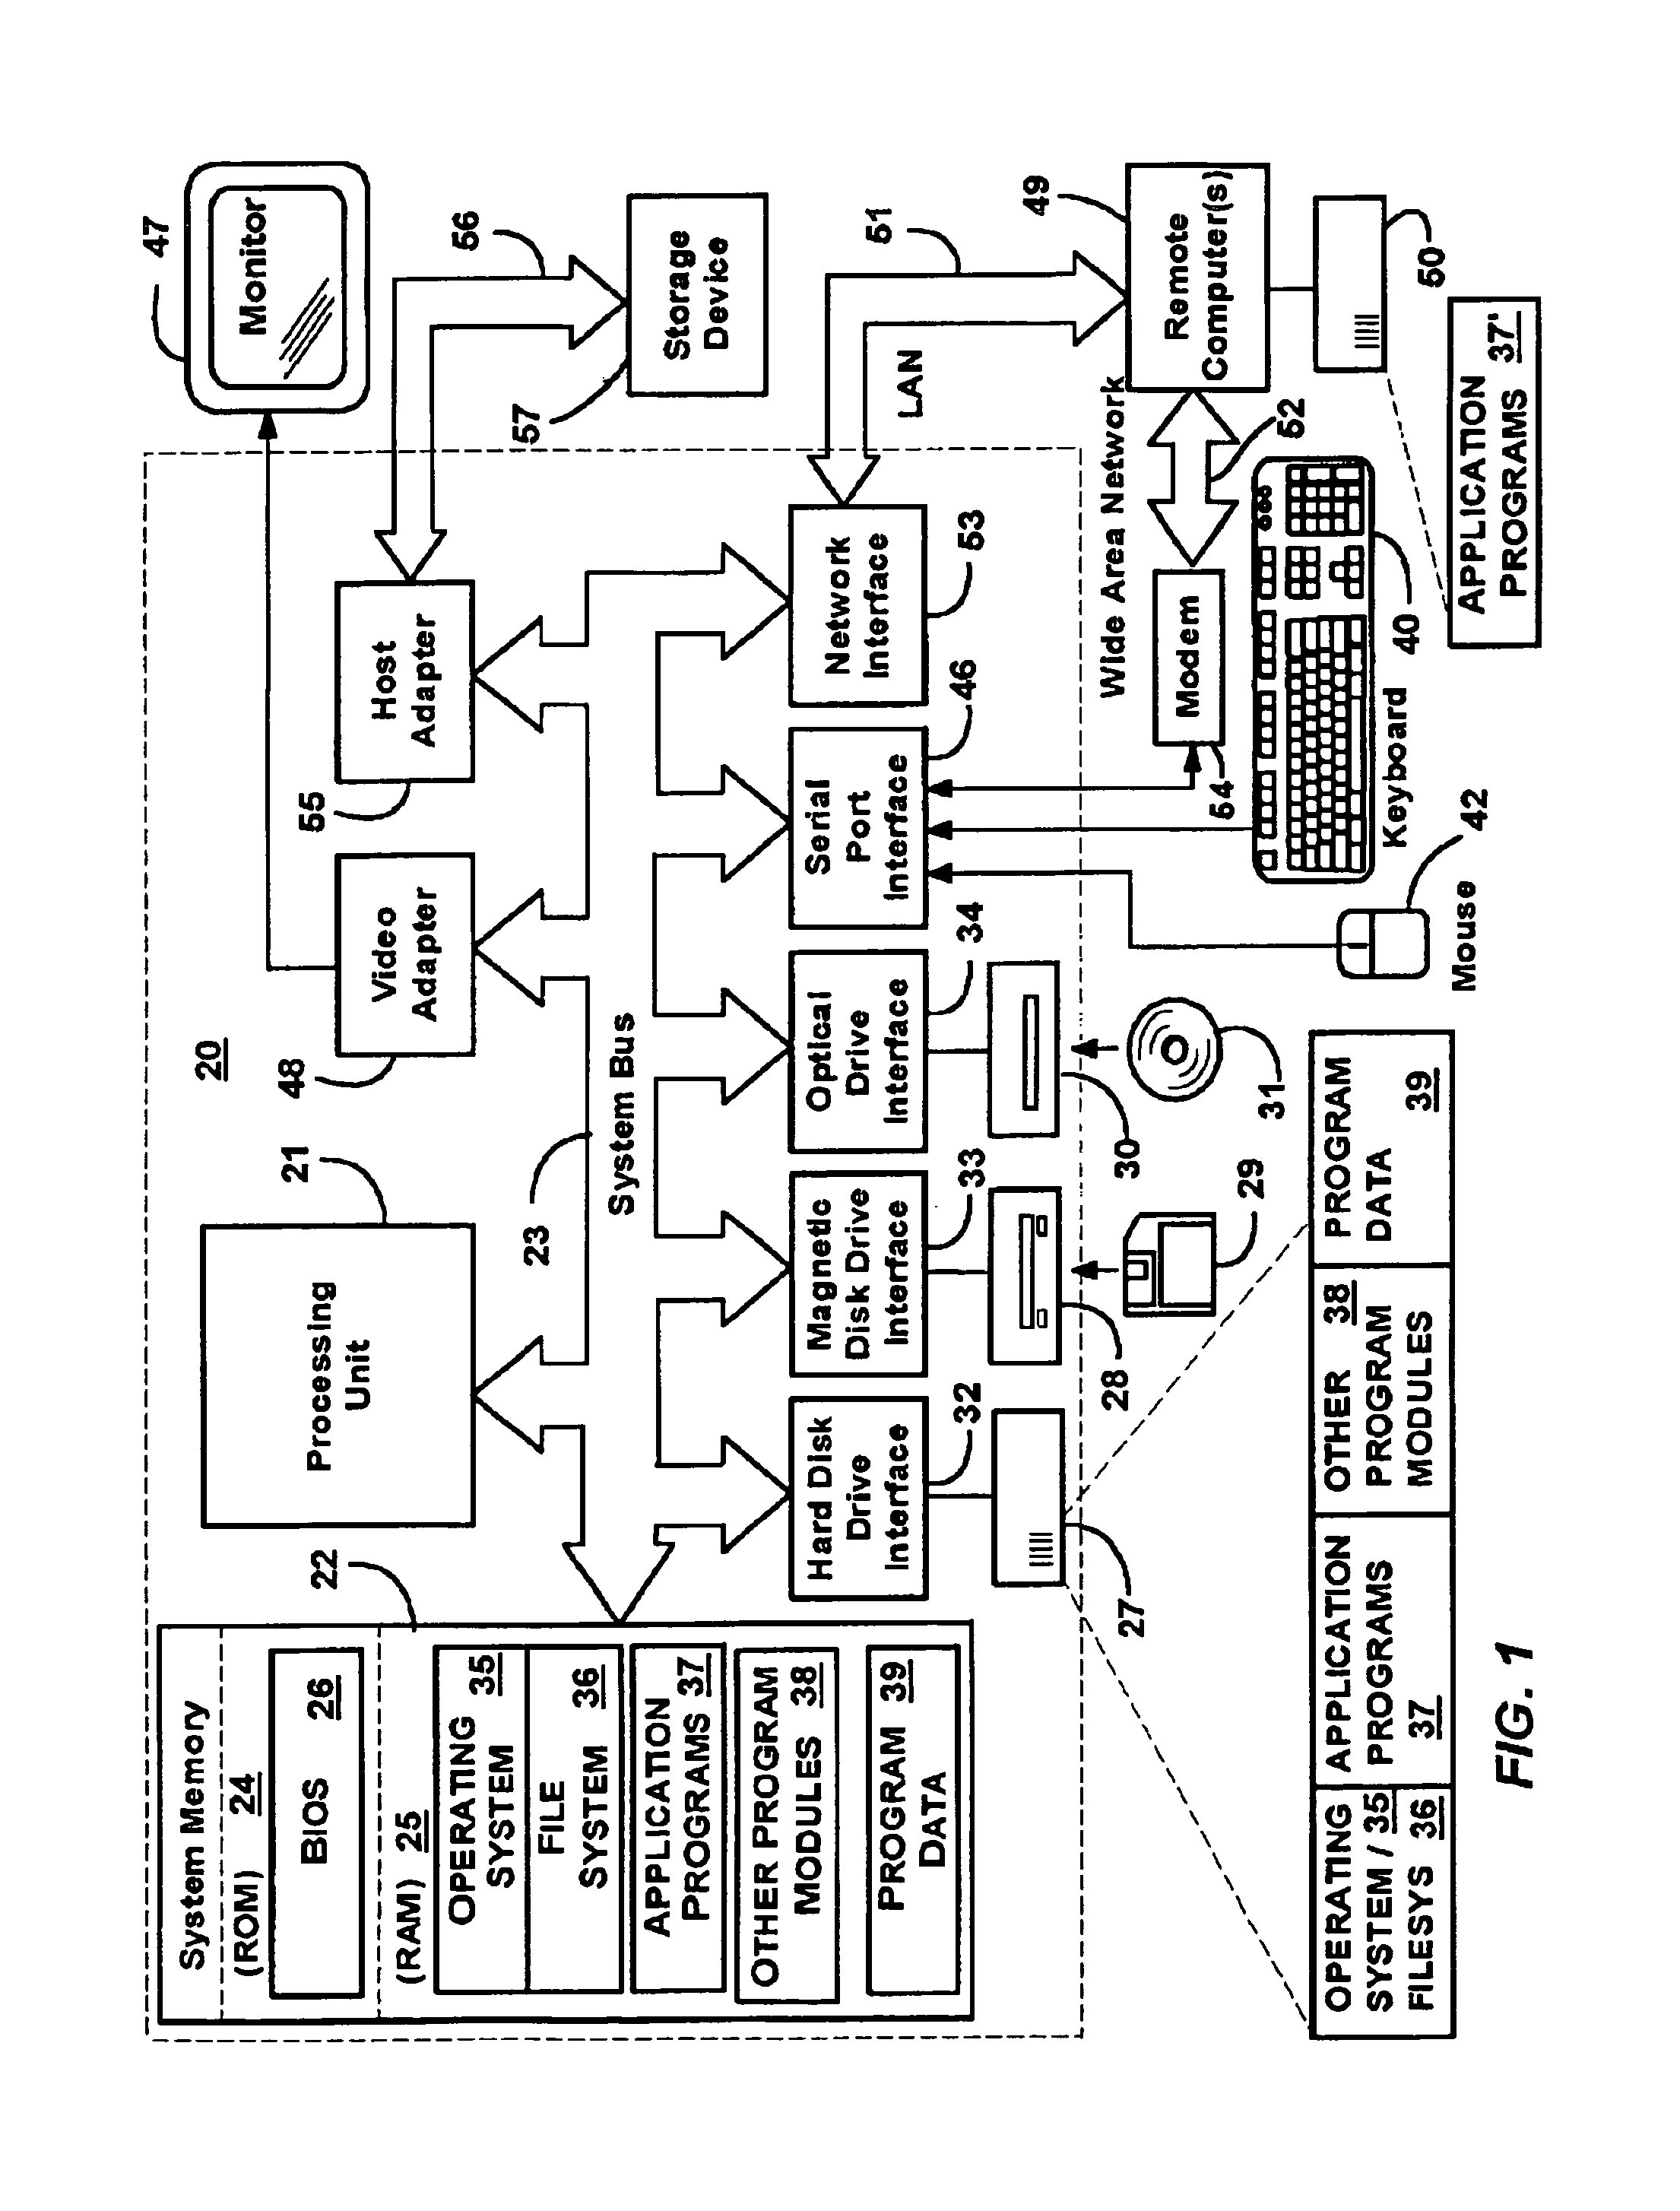 Method to share identical files in a common area for virtual machines having the same operating system version and using a copy on write to place a copy of the shared identical file in a private area of the corresponding virtual machine when a virtual machine attempts to modify the shared identical file